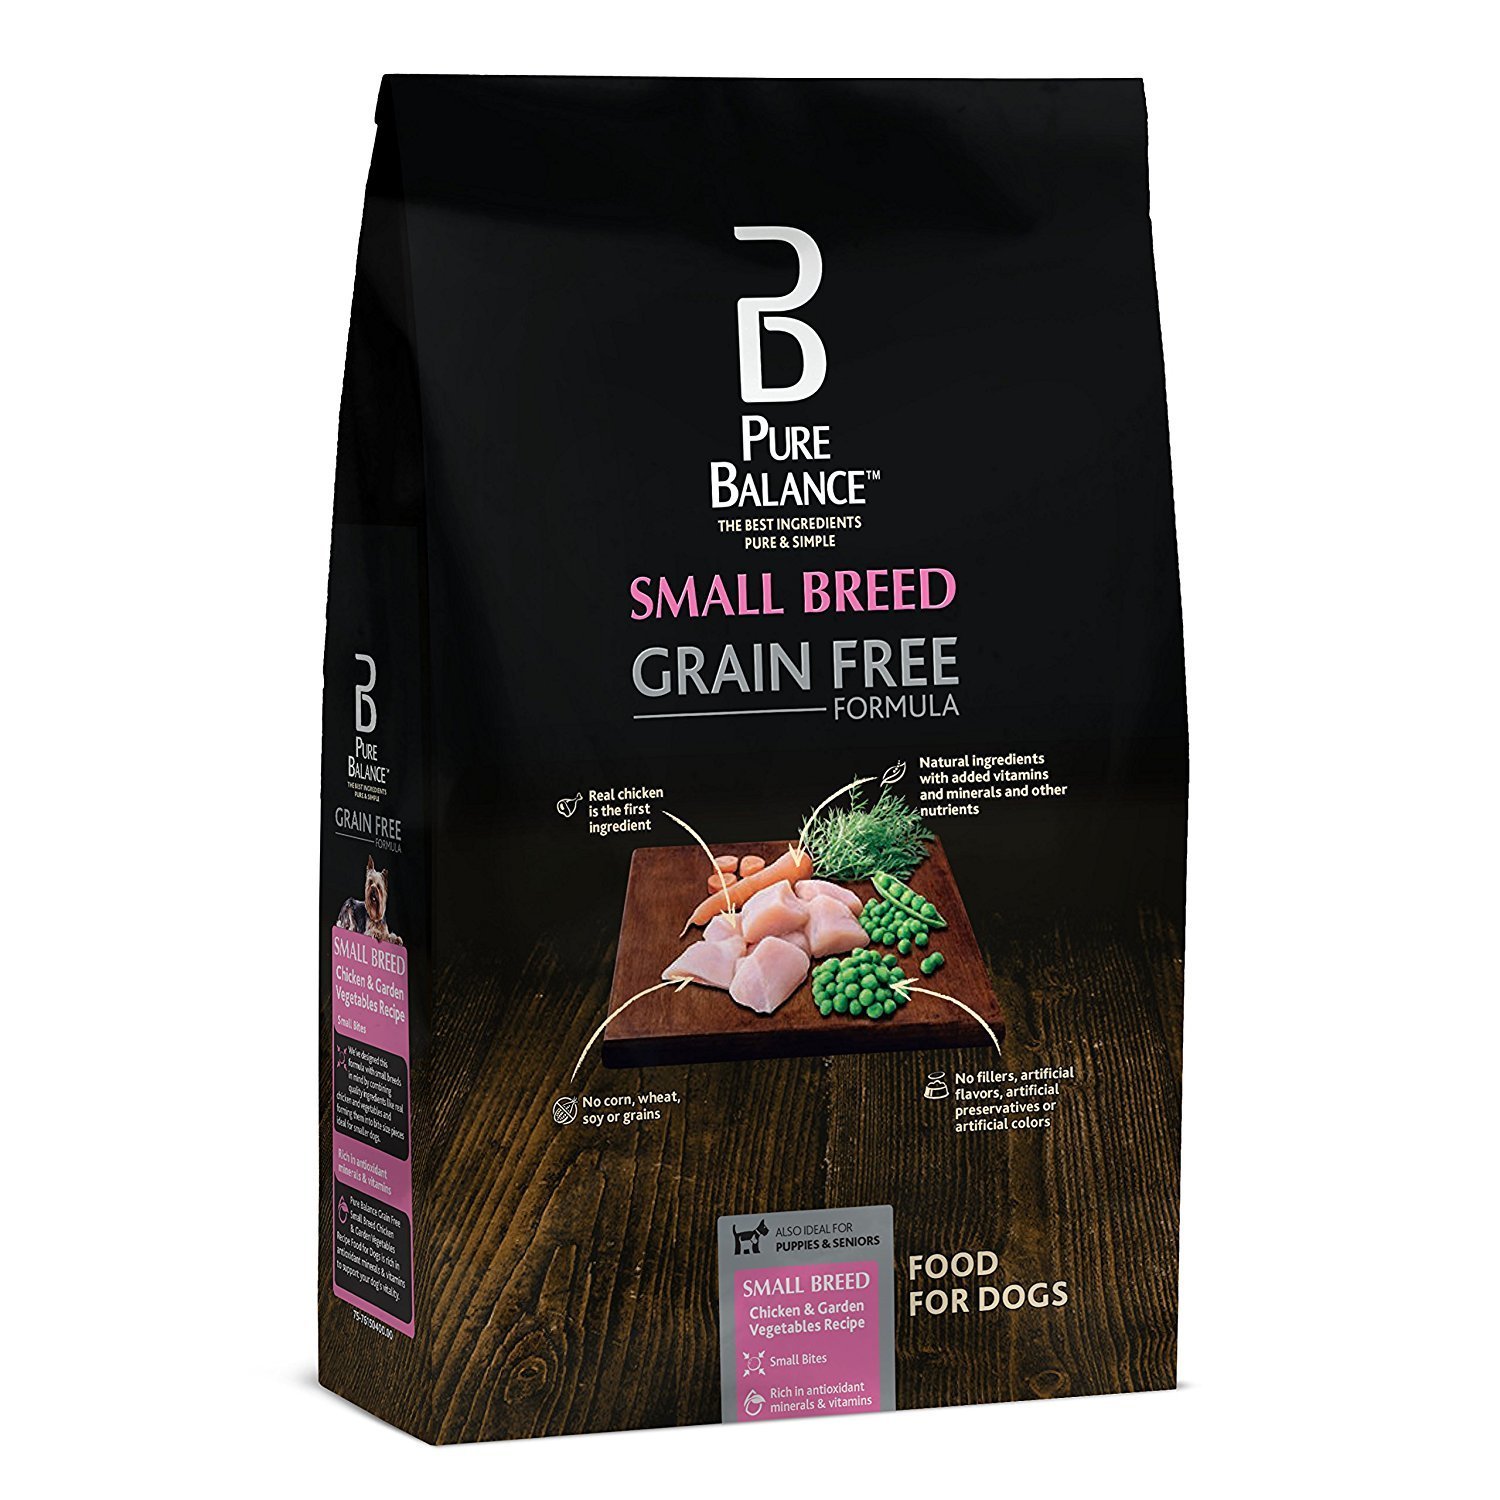 pure balance grain free canned dog food review